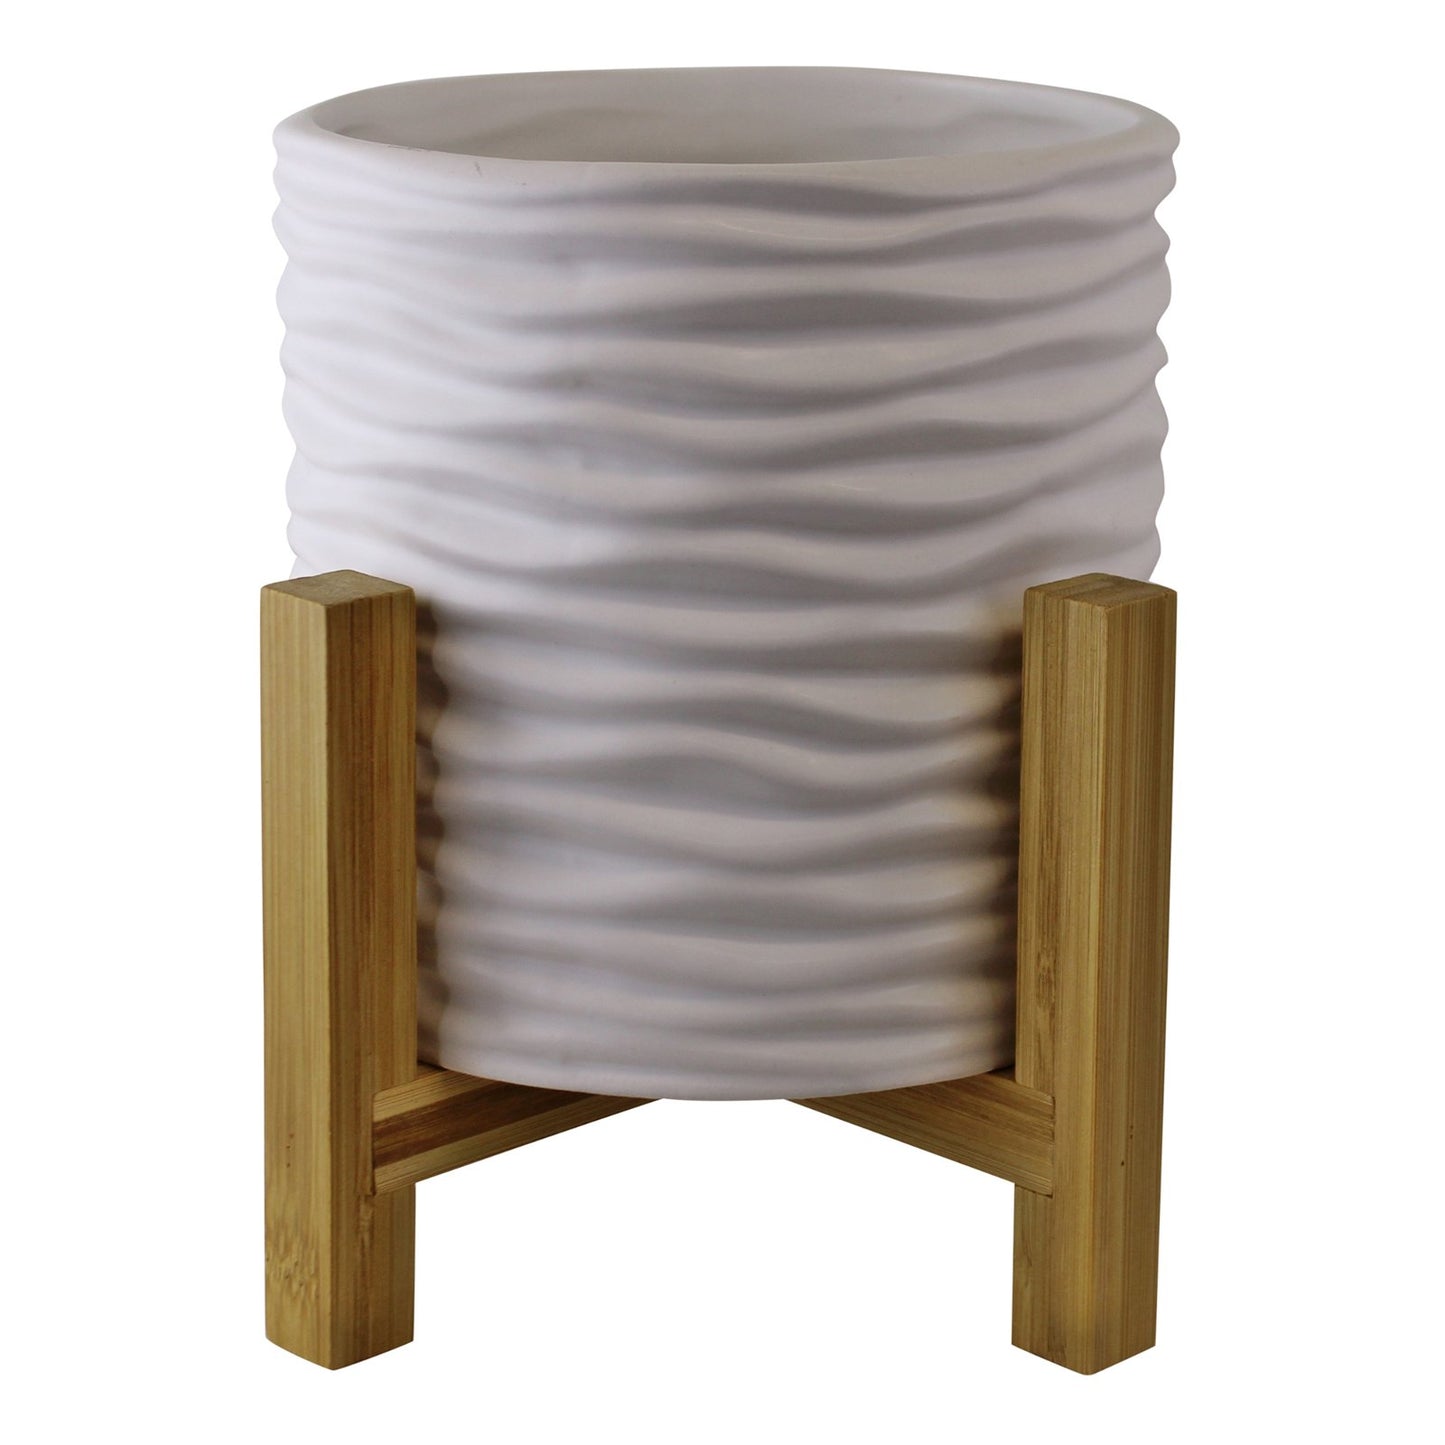 Small White Stoneware Planter On Wooden Stand - Kaftan direct